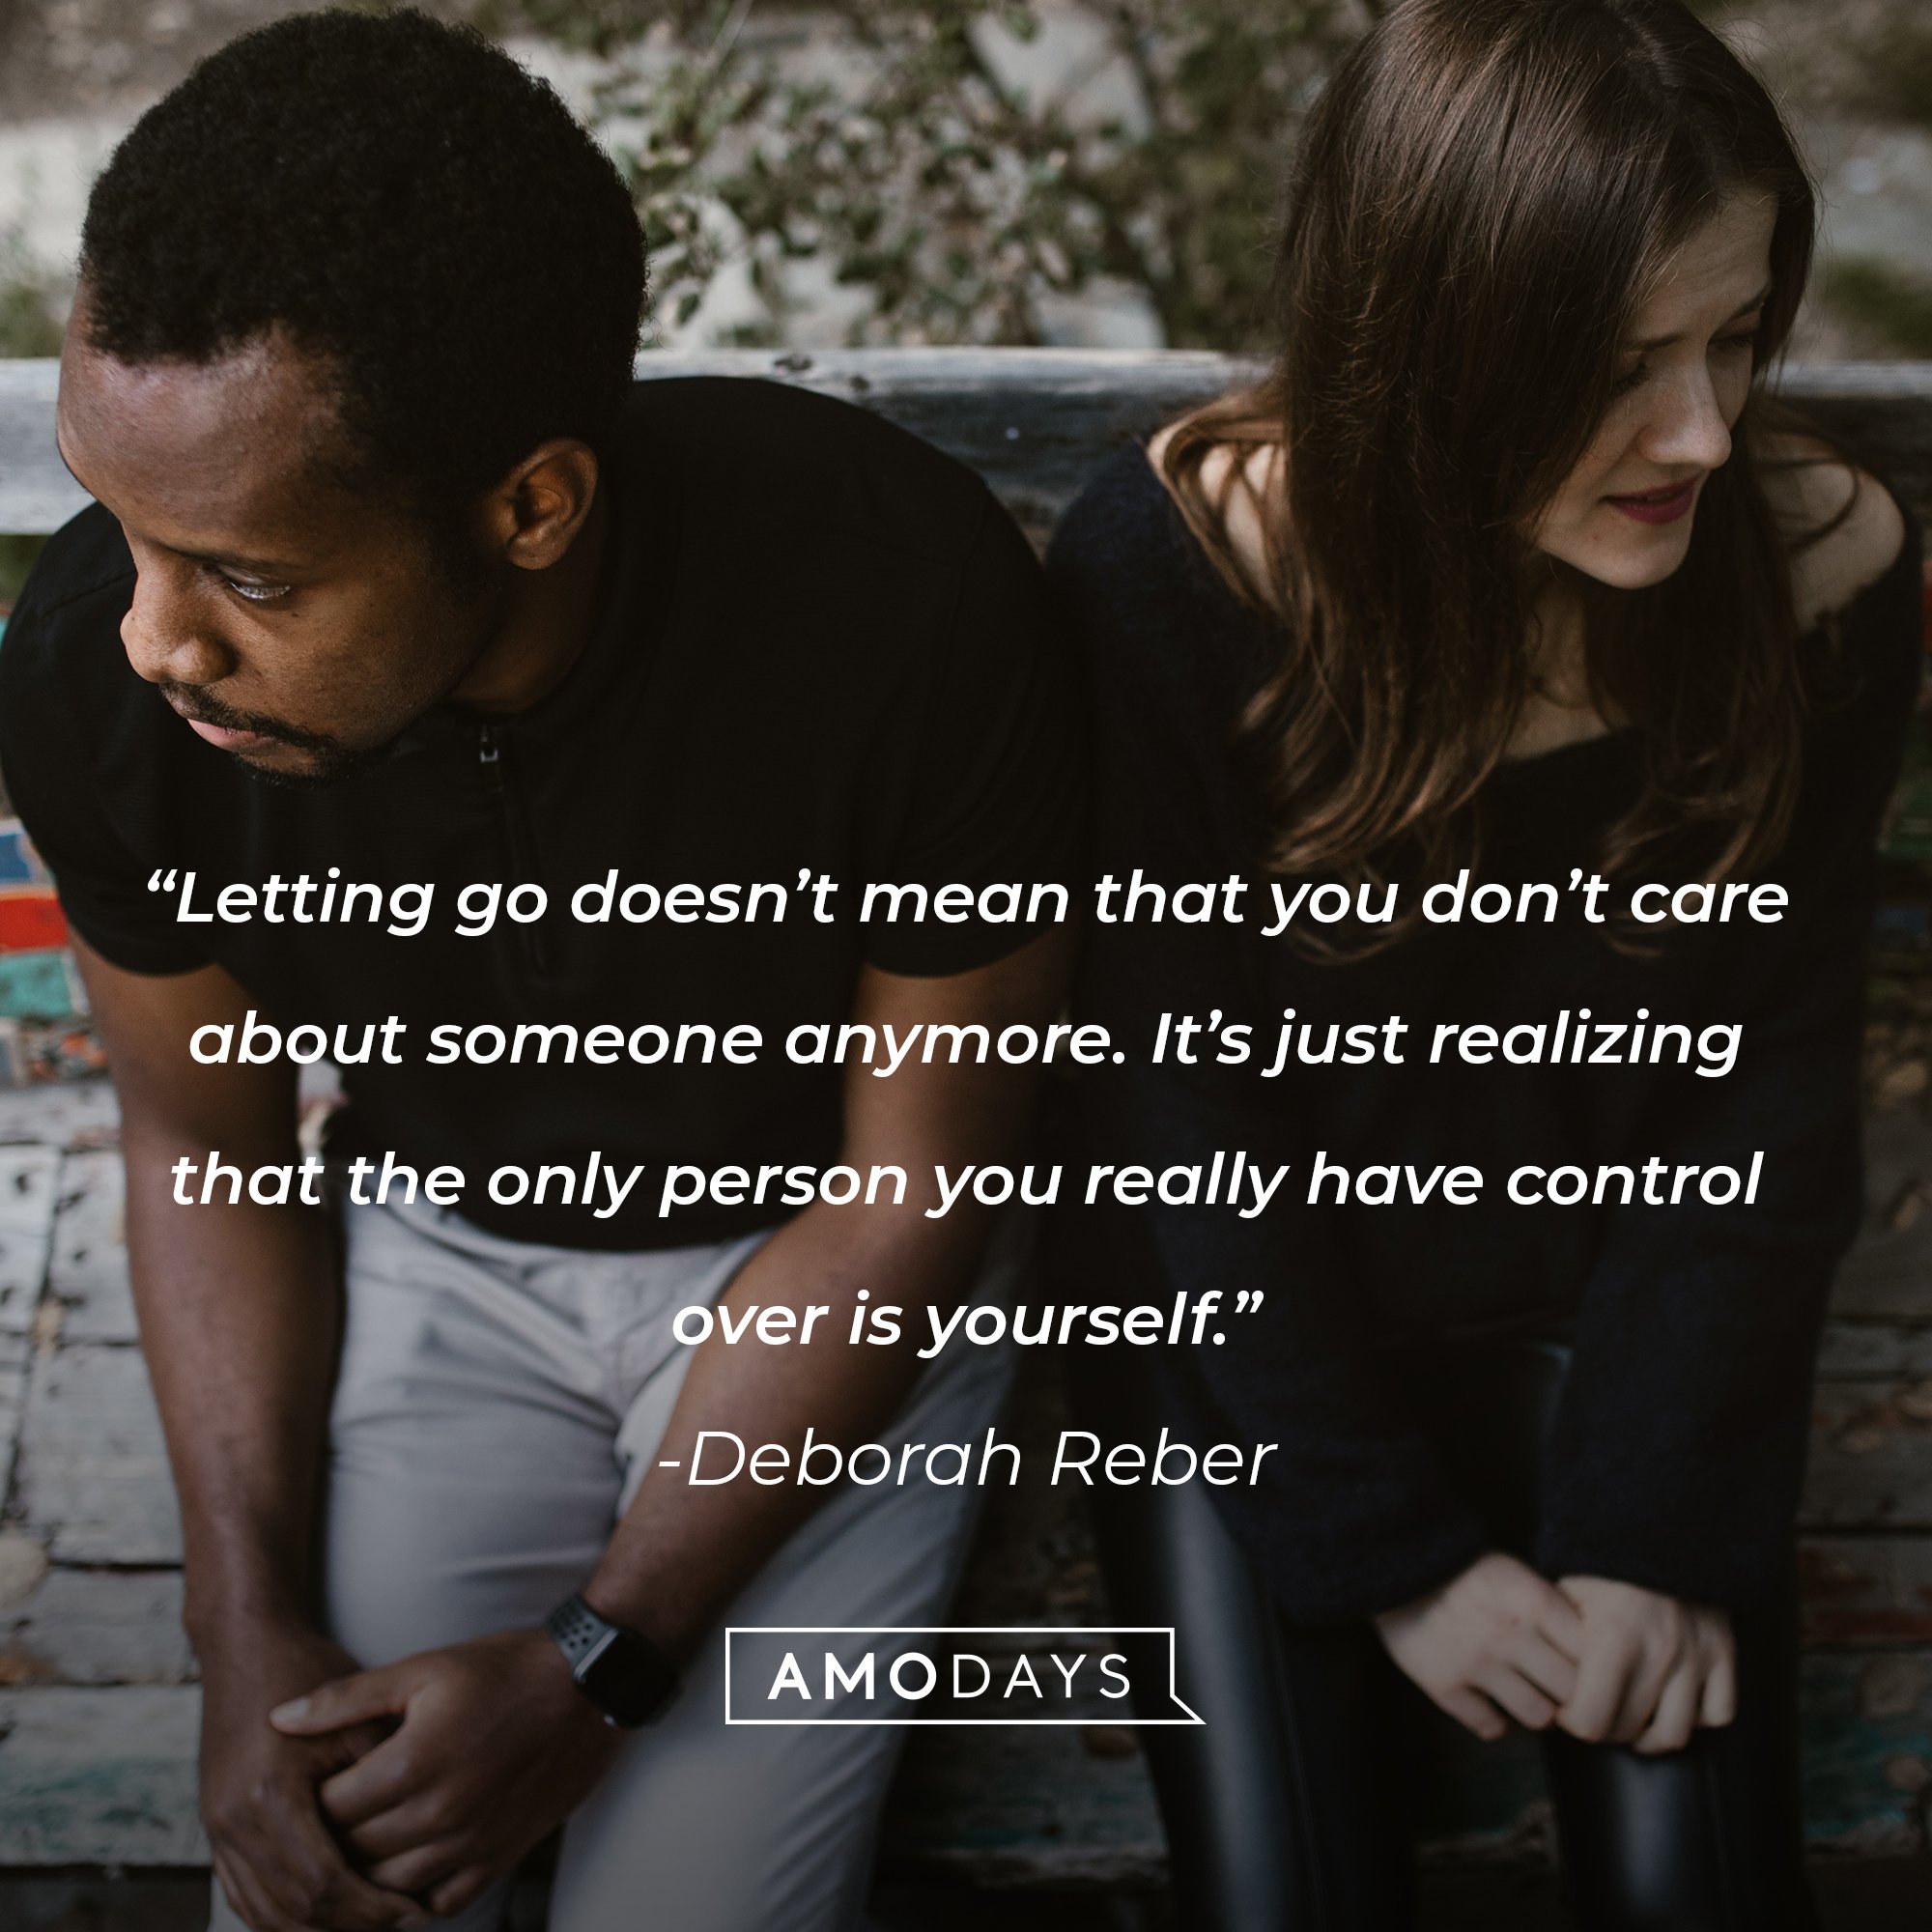 Deborah Reber's quote: “Letting go doesn’t mean that you don’t care about someone anymore. It’s just realizing that the only person you really have control over is yourself.” | Image: AmoDays